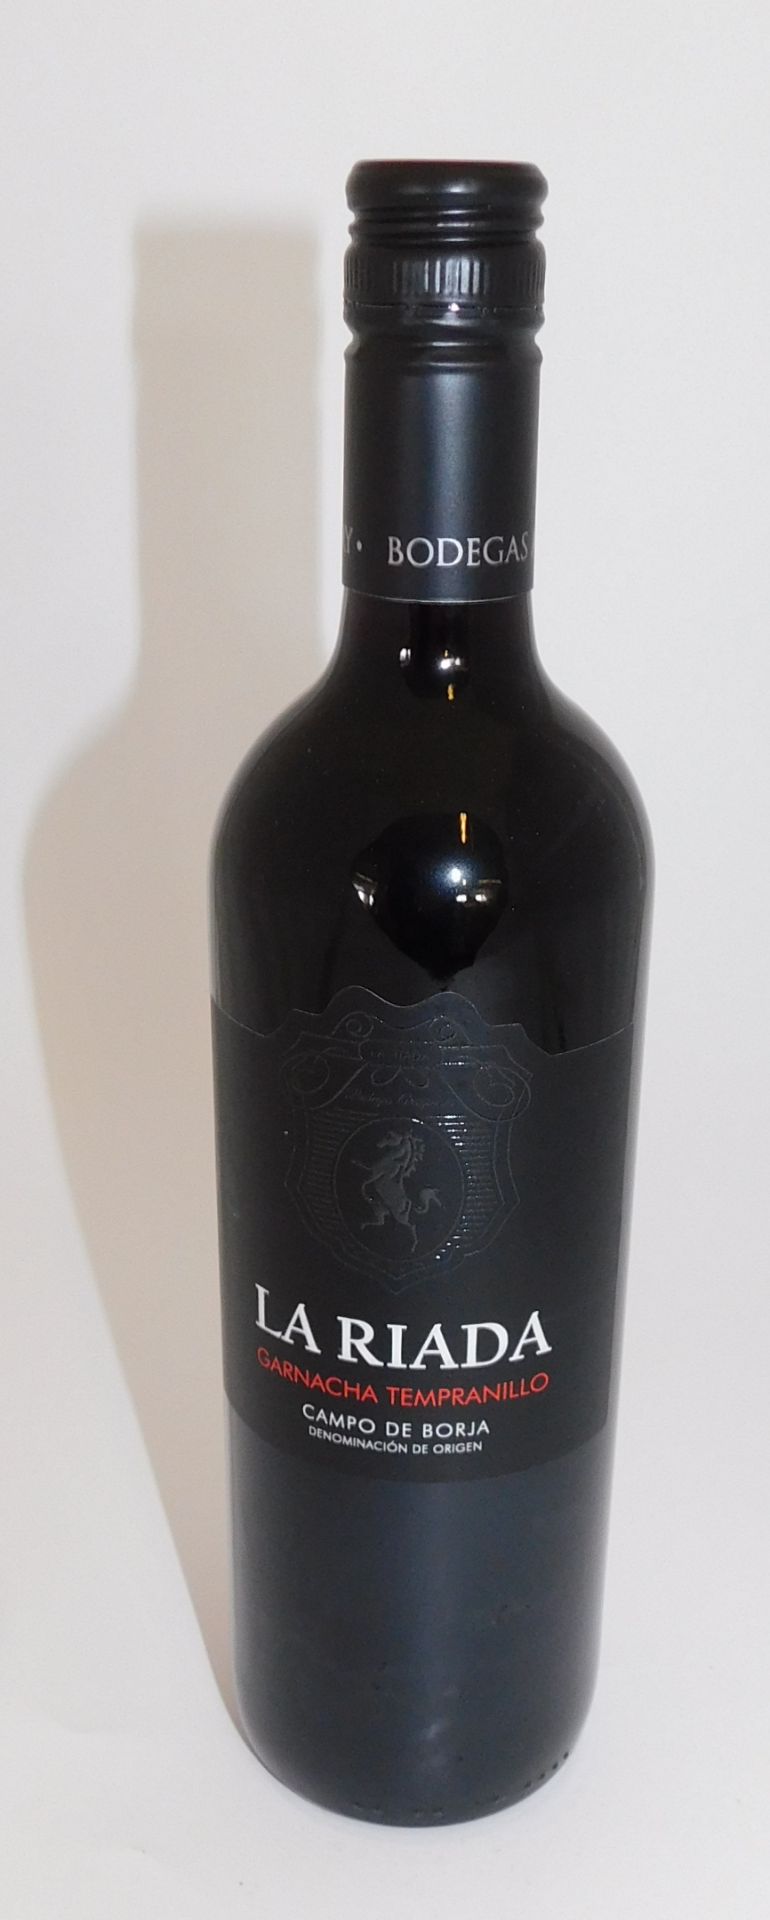 18 Bottles of La Rianda Garnacha Tempranillo, 75cl (Located Stockport – See General Notes for More